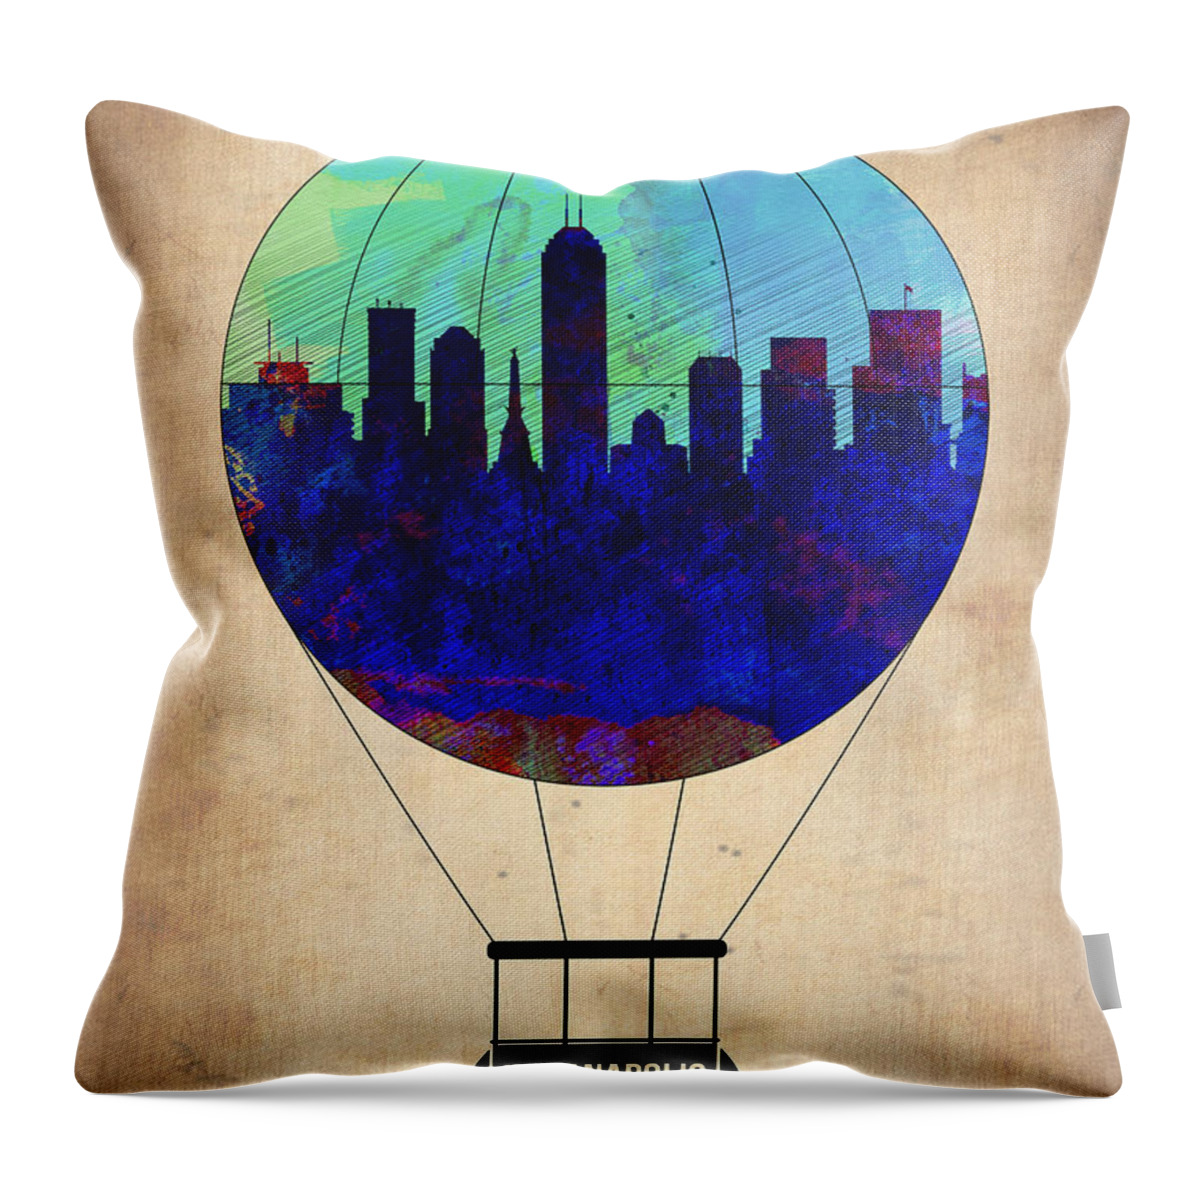 Indianapolis Throw Pillow featuring the painting Indianapolis Air Balloon by Naxart Studio